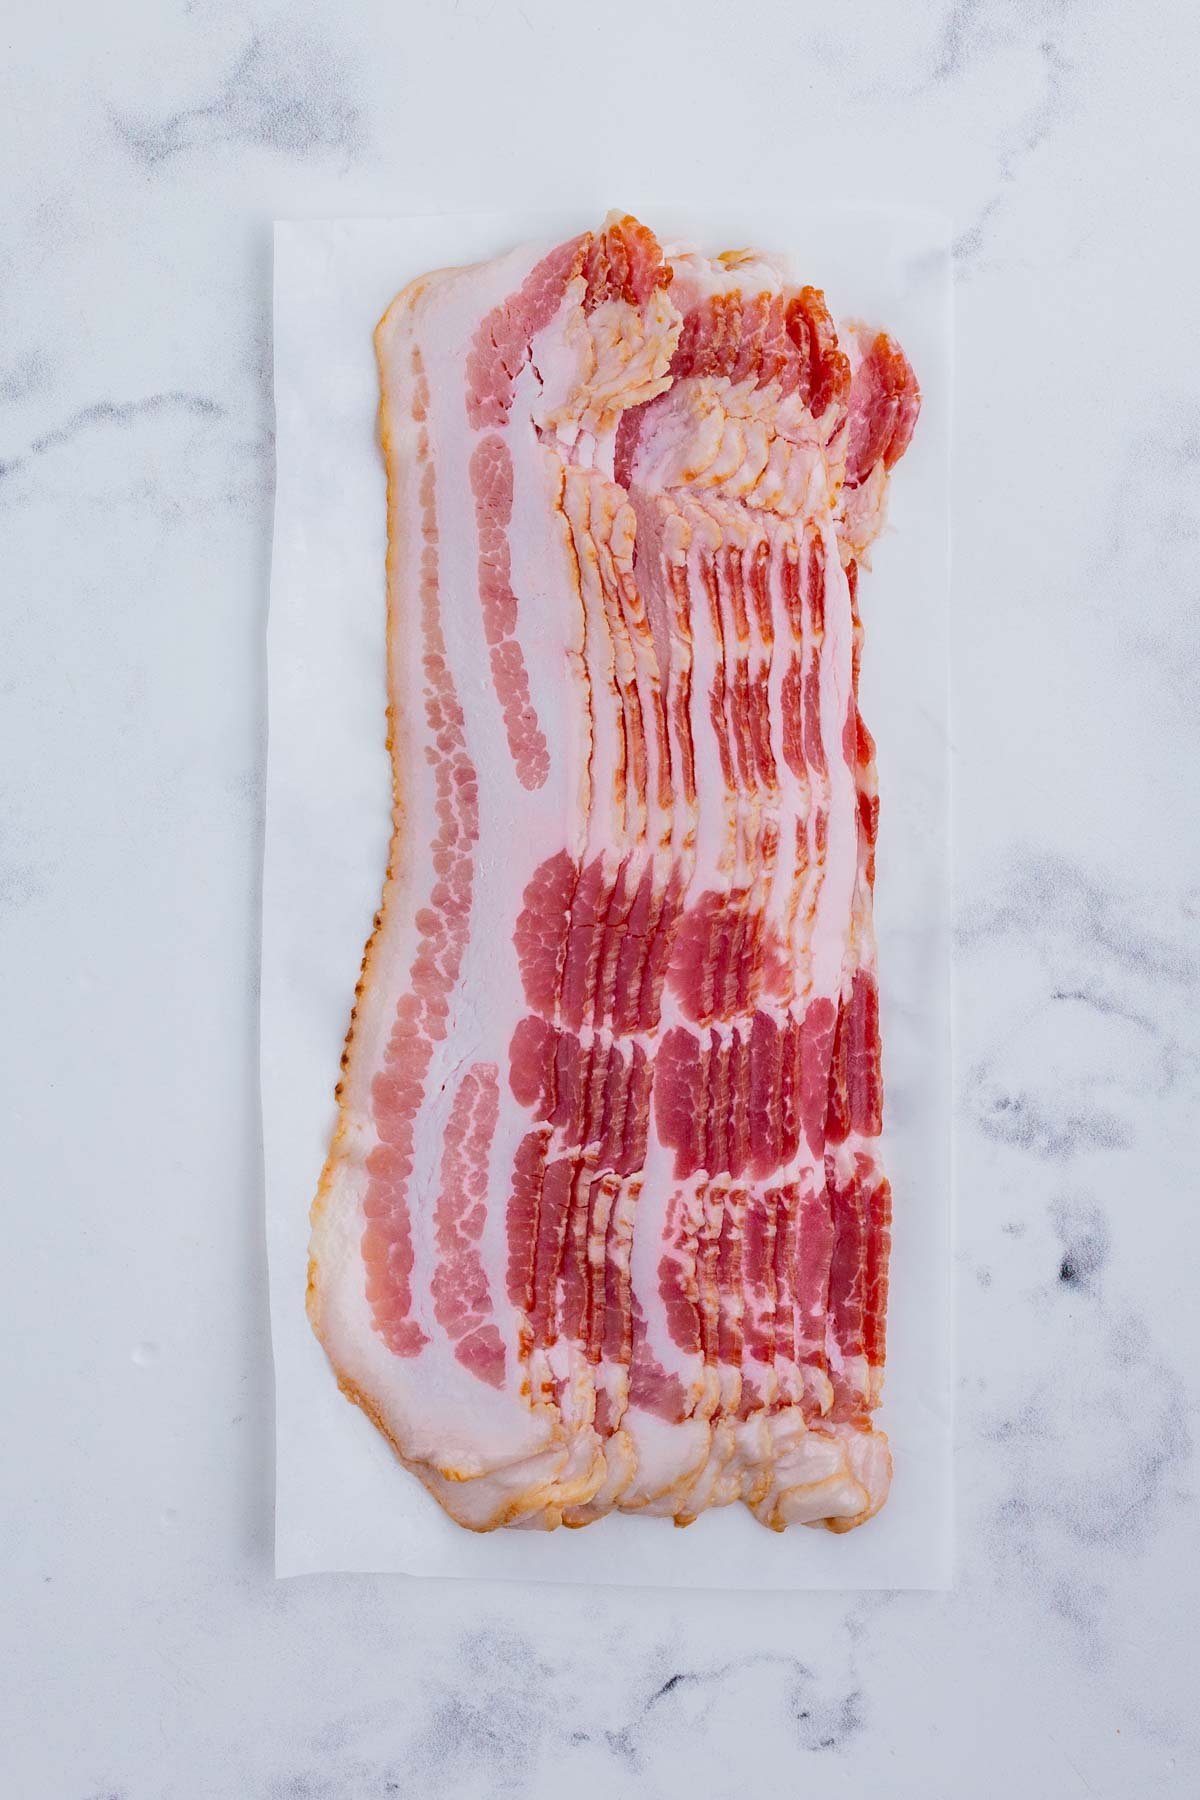 Bacon is the only ingredient for this recipe.